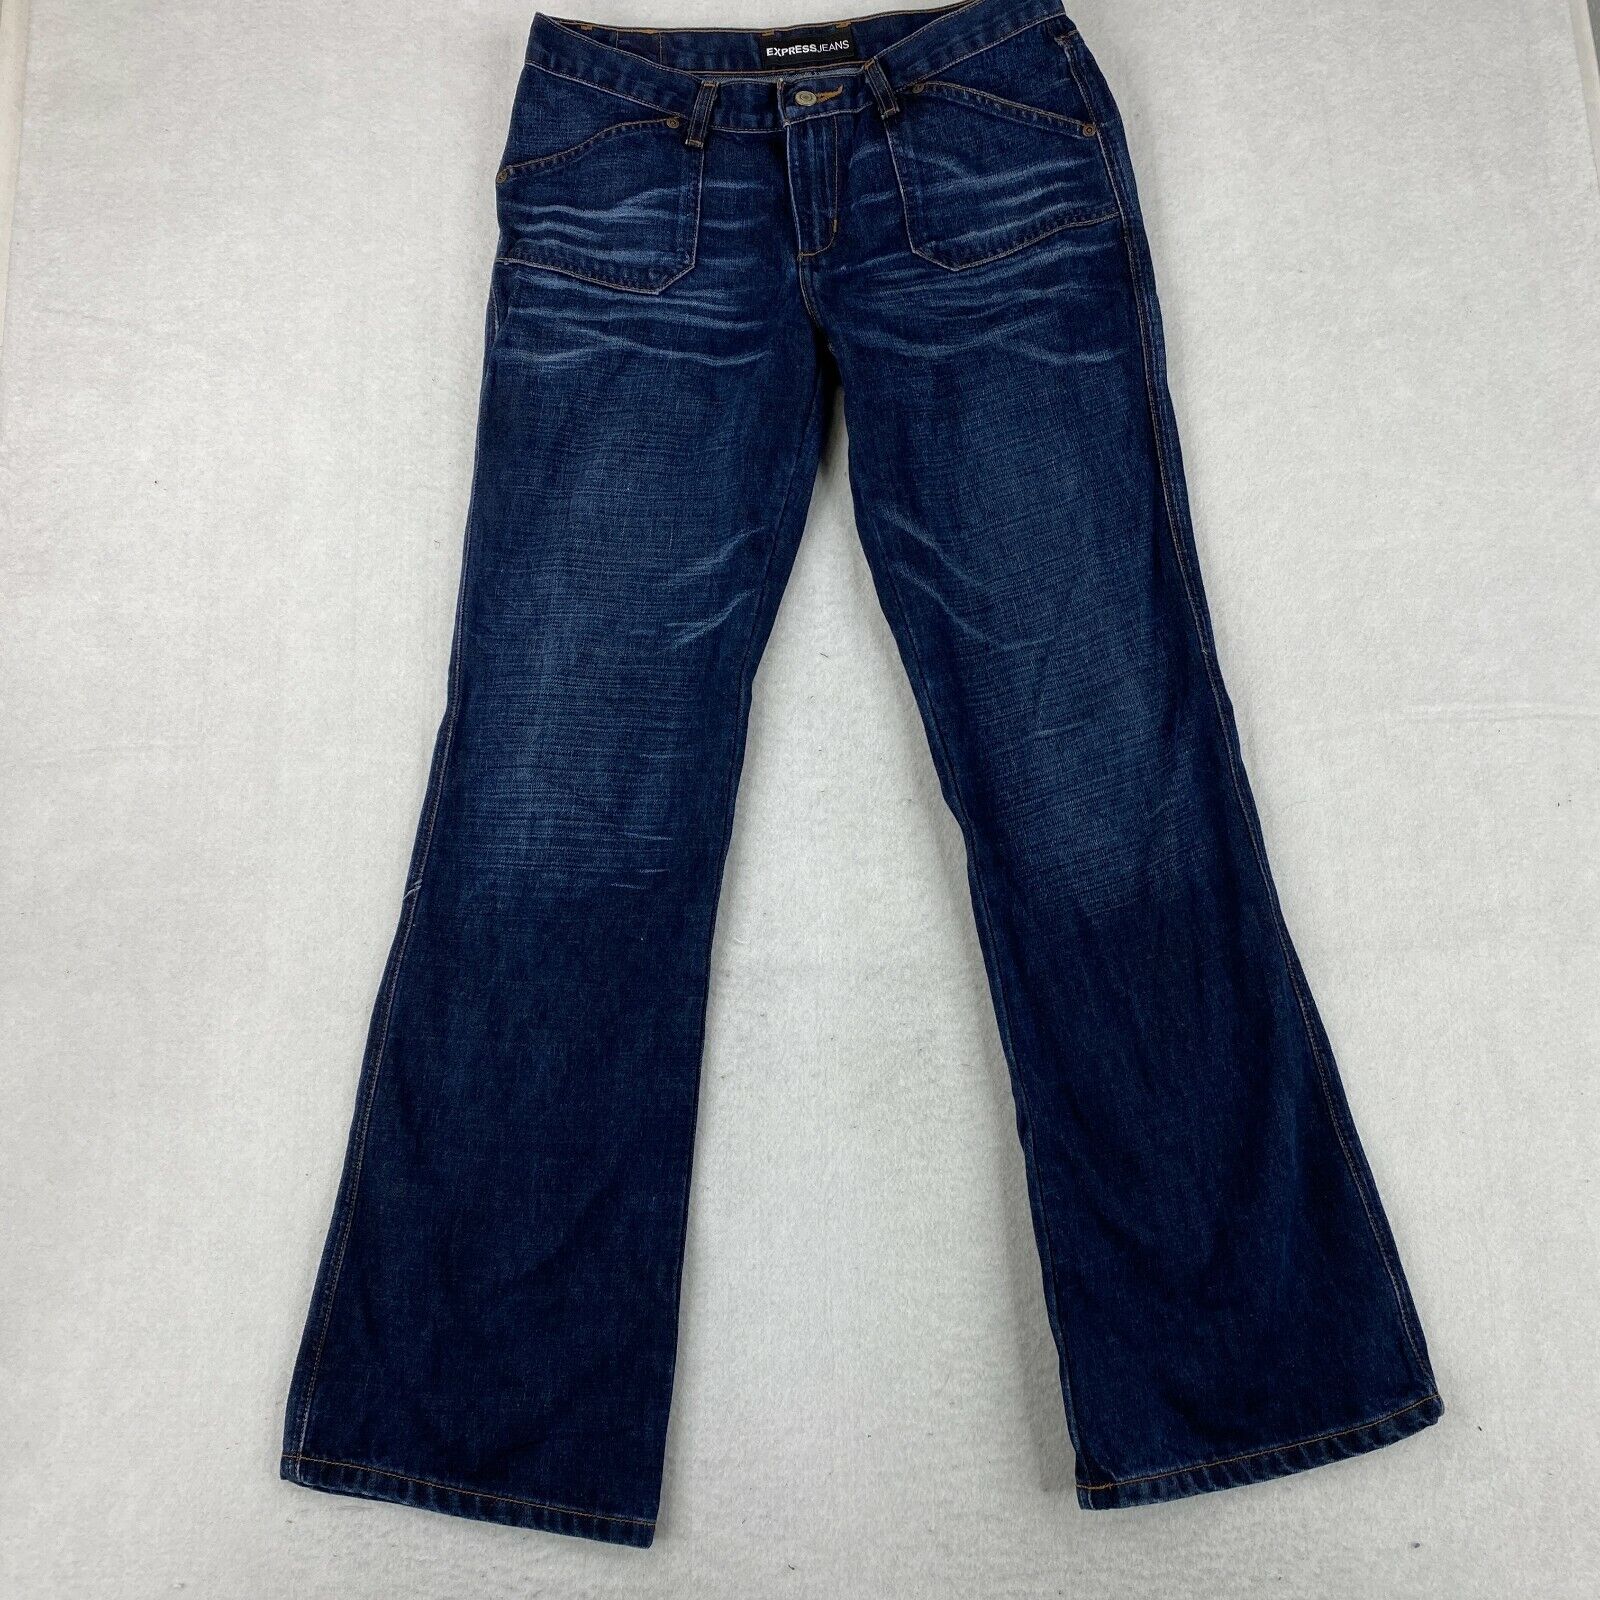 Express Jeans Juniors Size 7 Blue Mid Fit Rise Pants Bootcut 最大60%OFFクーポン 国内外の人気集結！ Precision